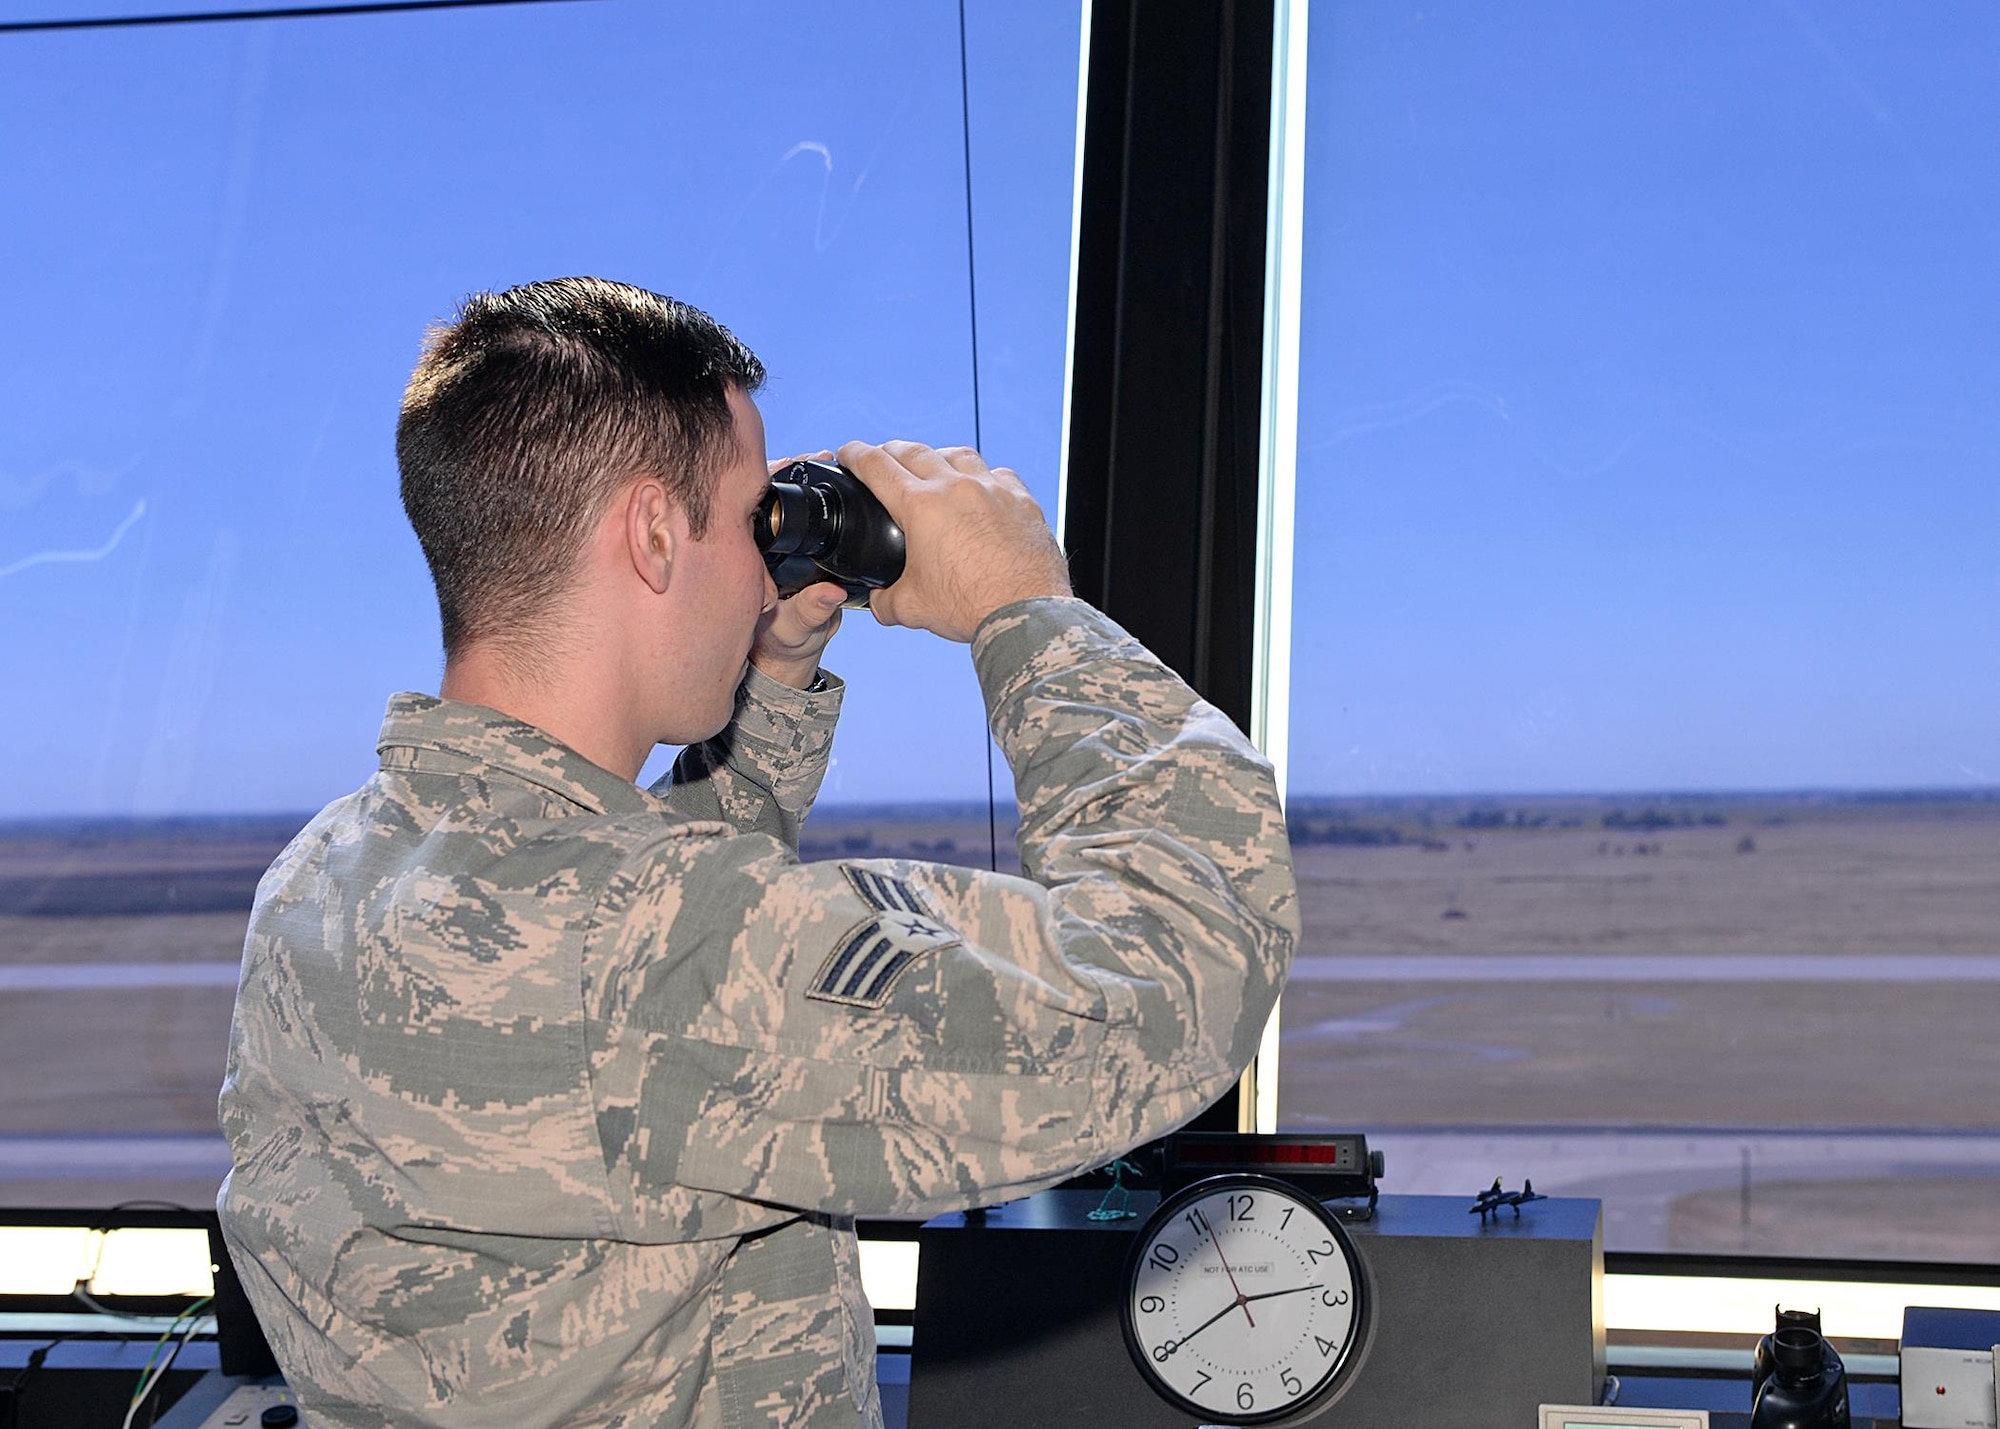 Senior Airman Joseph Shine, 9th Operations Support Squadron air traffic controller, watches an aircraft land Aug. 31, 2016, at Beale Air Force Base, California. The Beale air traffic control tower won the Air Force’s 2015 air traffic control tower of the year. (U.S Air Force photo by Airman Tristan D. Viglianco)